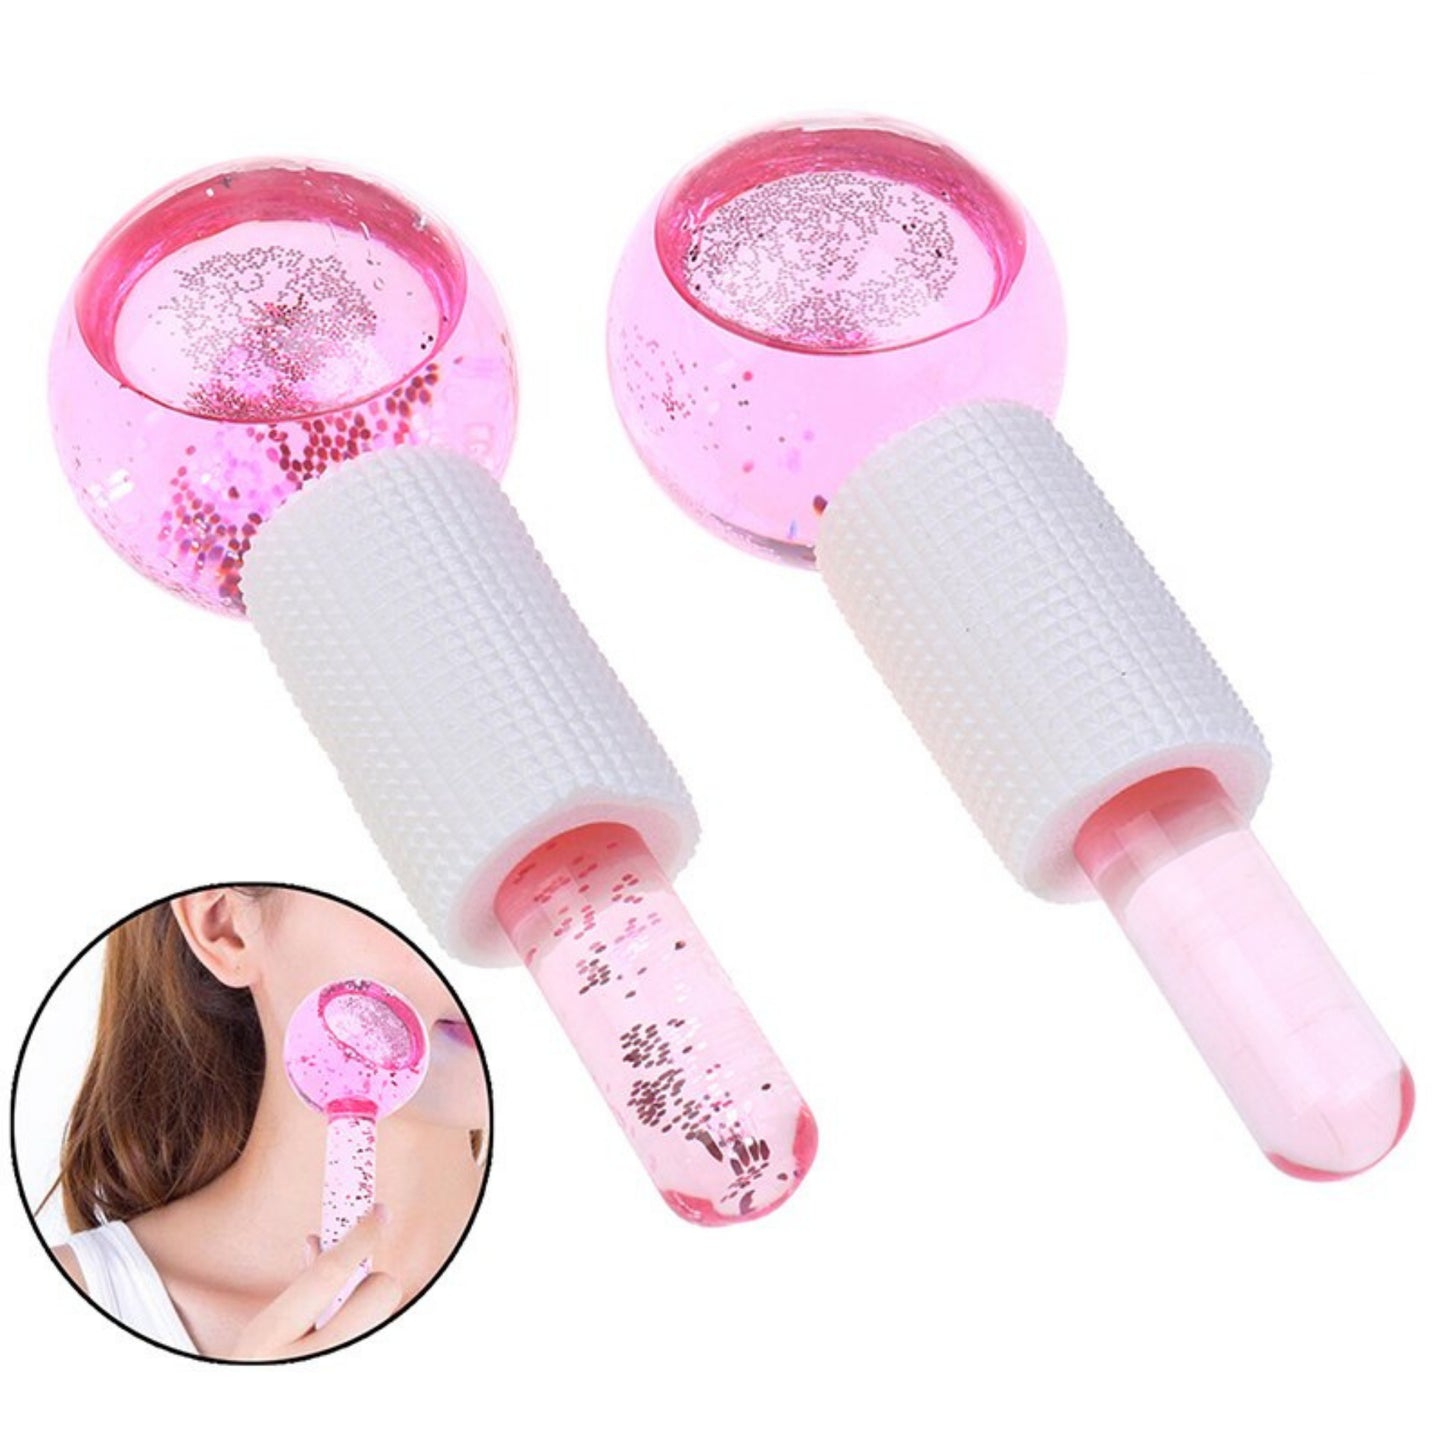 Glow Globes ice globes cooling cryotherapy facial massager